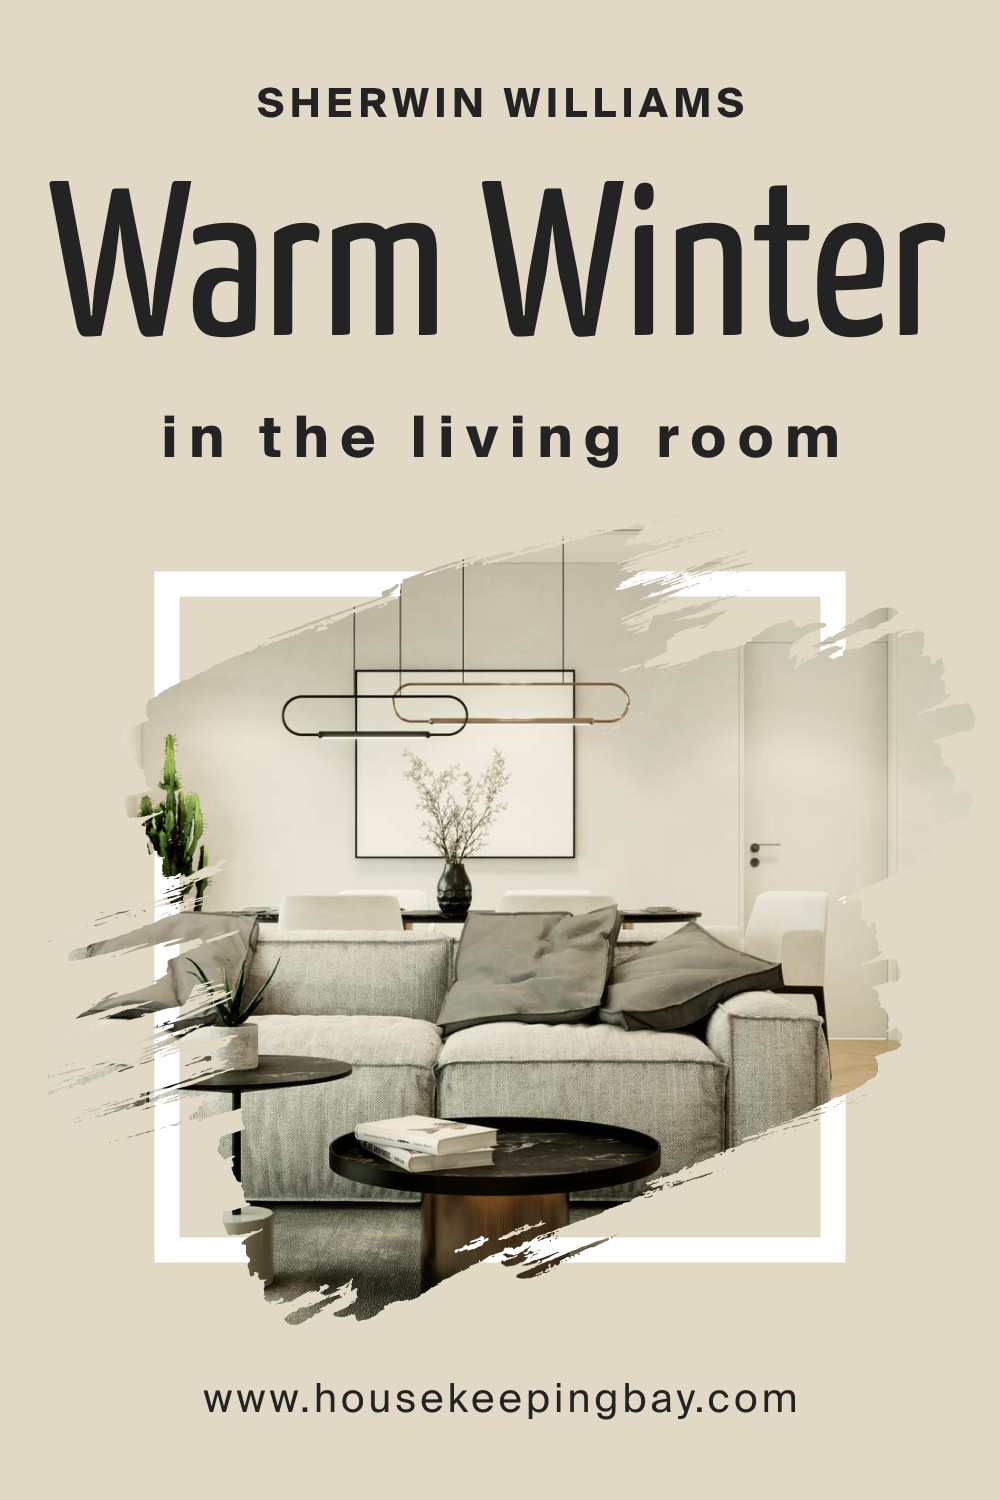 Sherwin Williams. SW 9506 Warm Winter In the Living Room